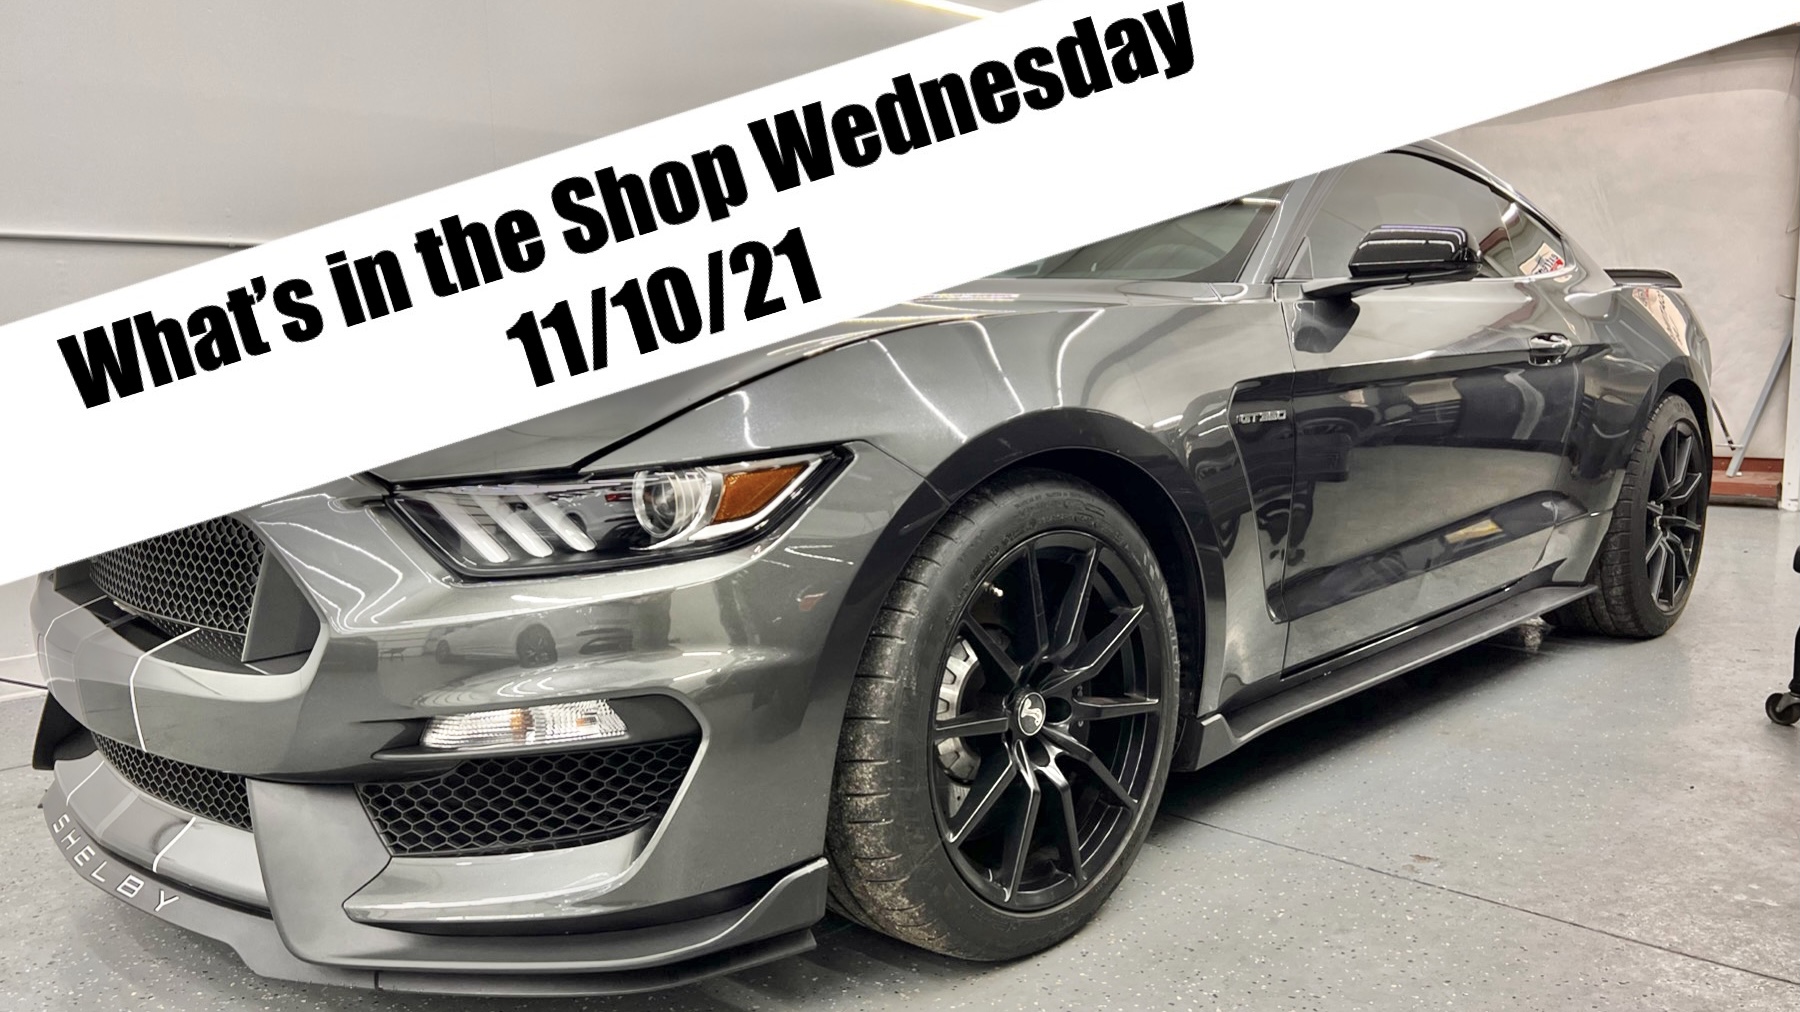 What’s in the Shop Wednesday 11/10/21